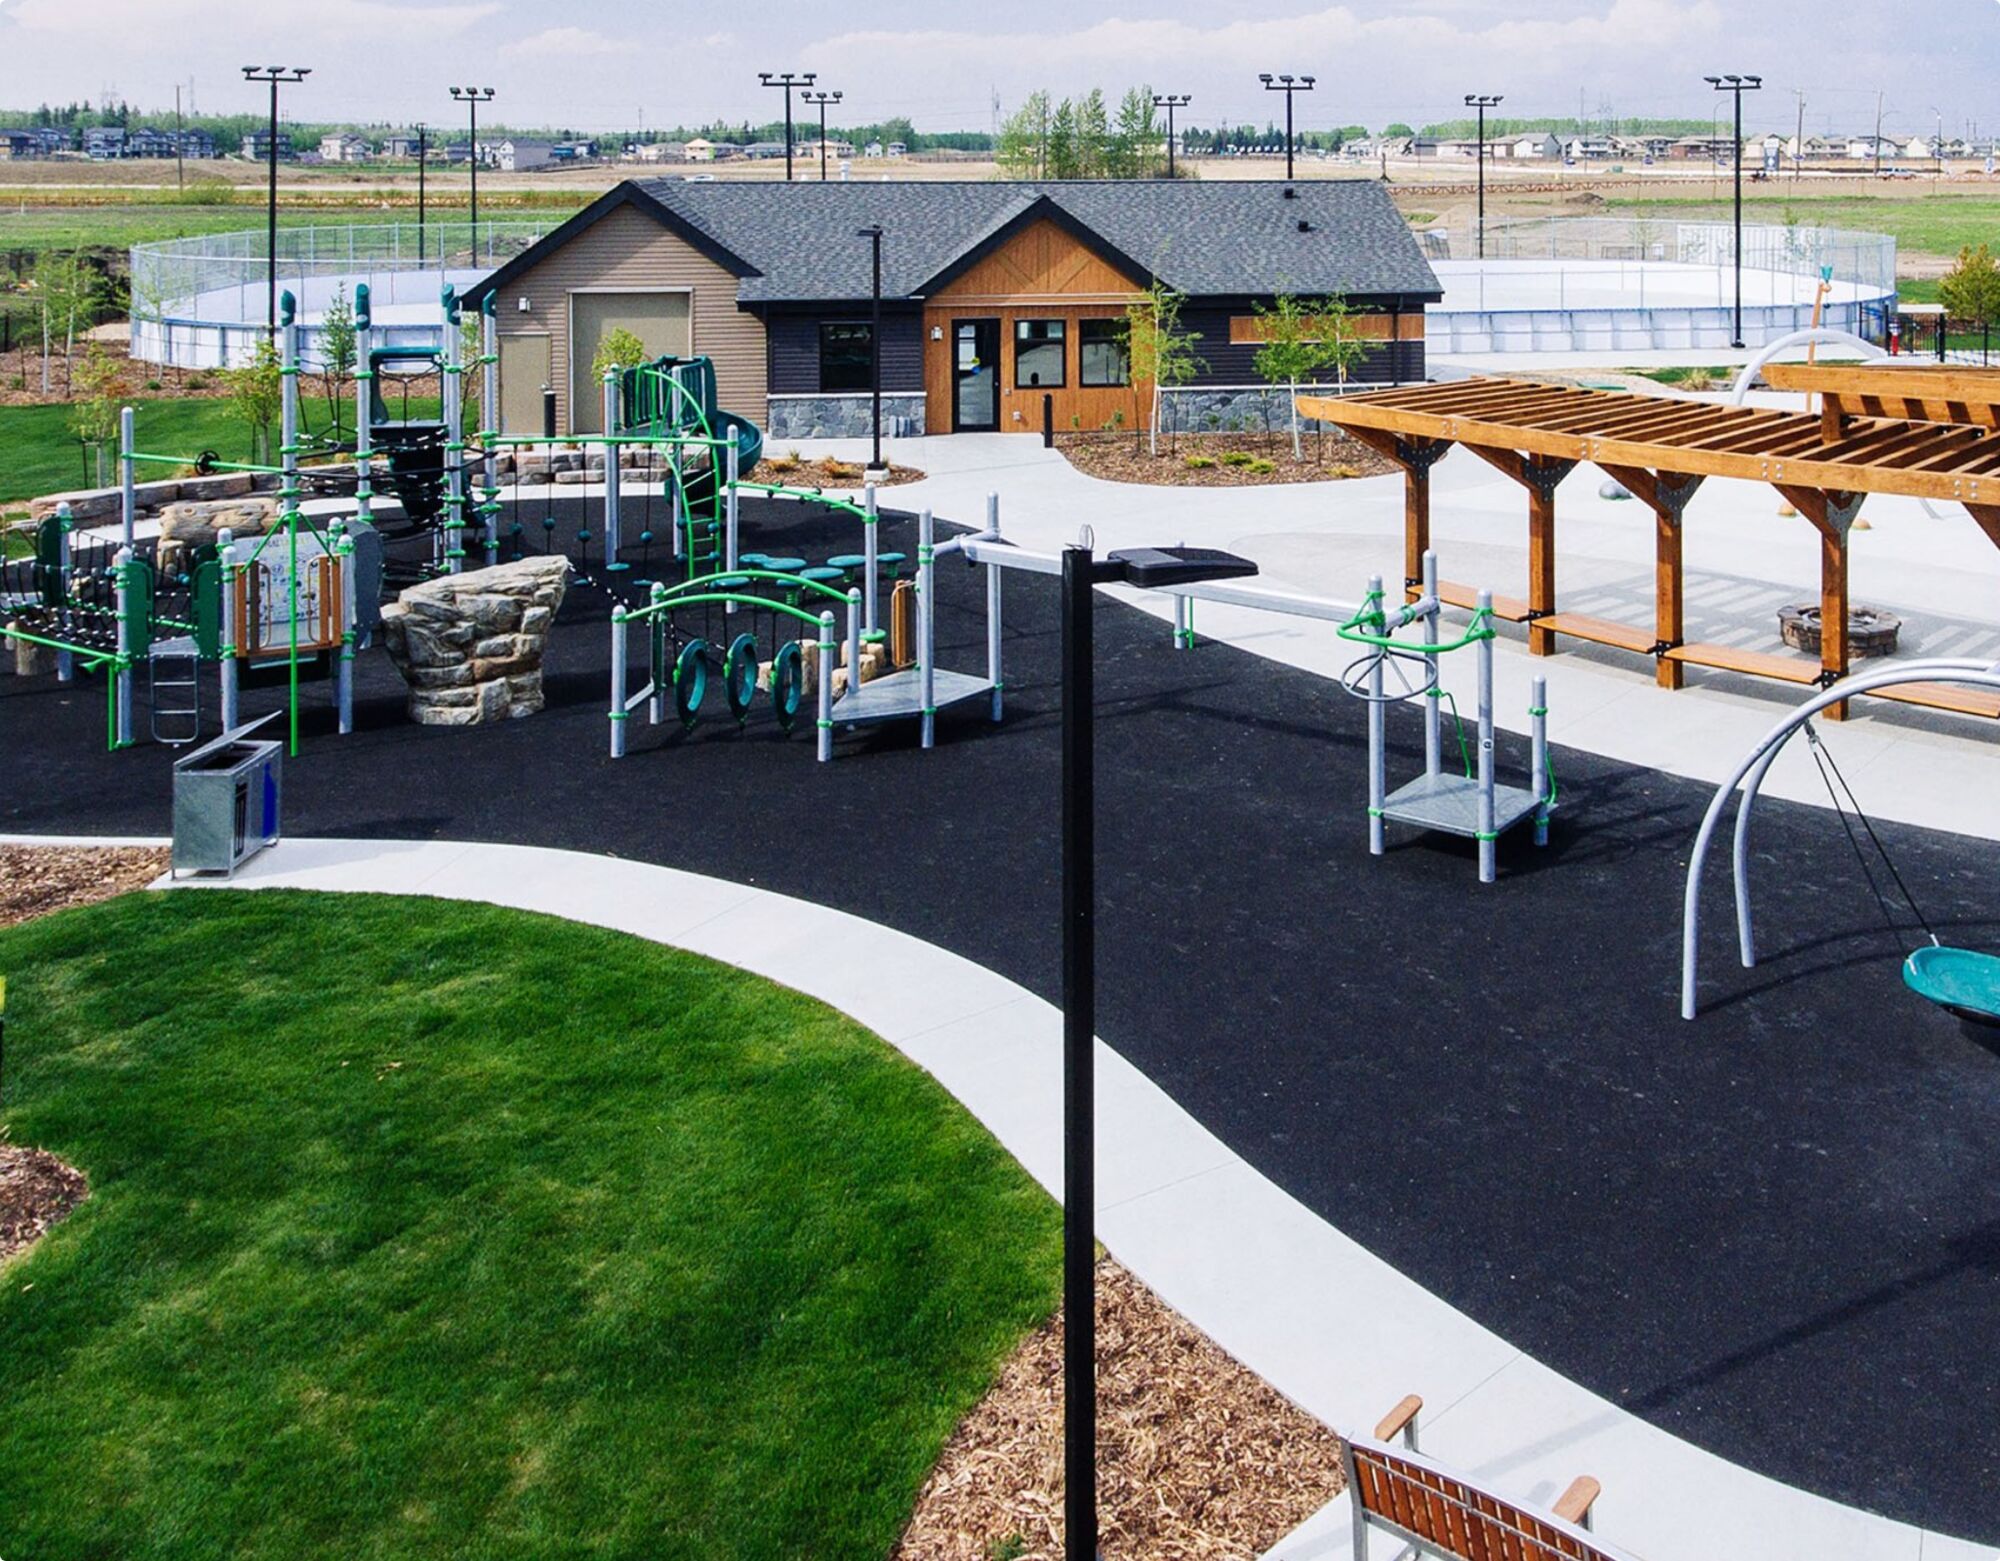 Image of the Stillwater playground and hockey rink.